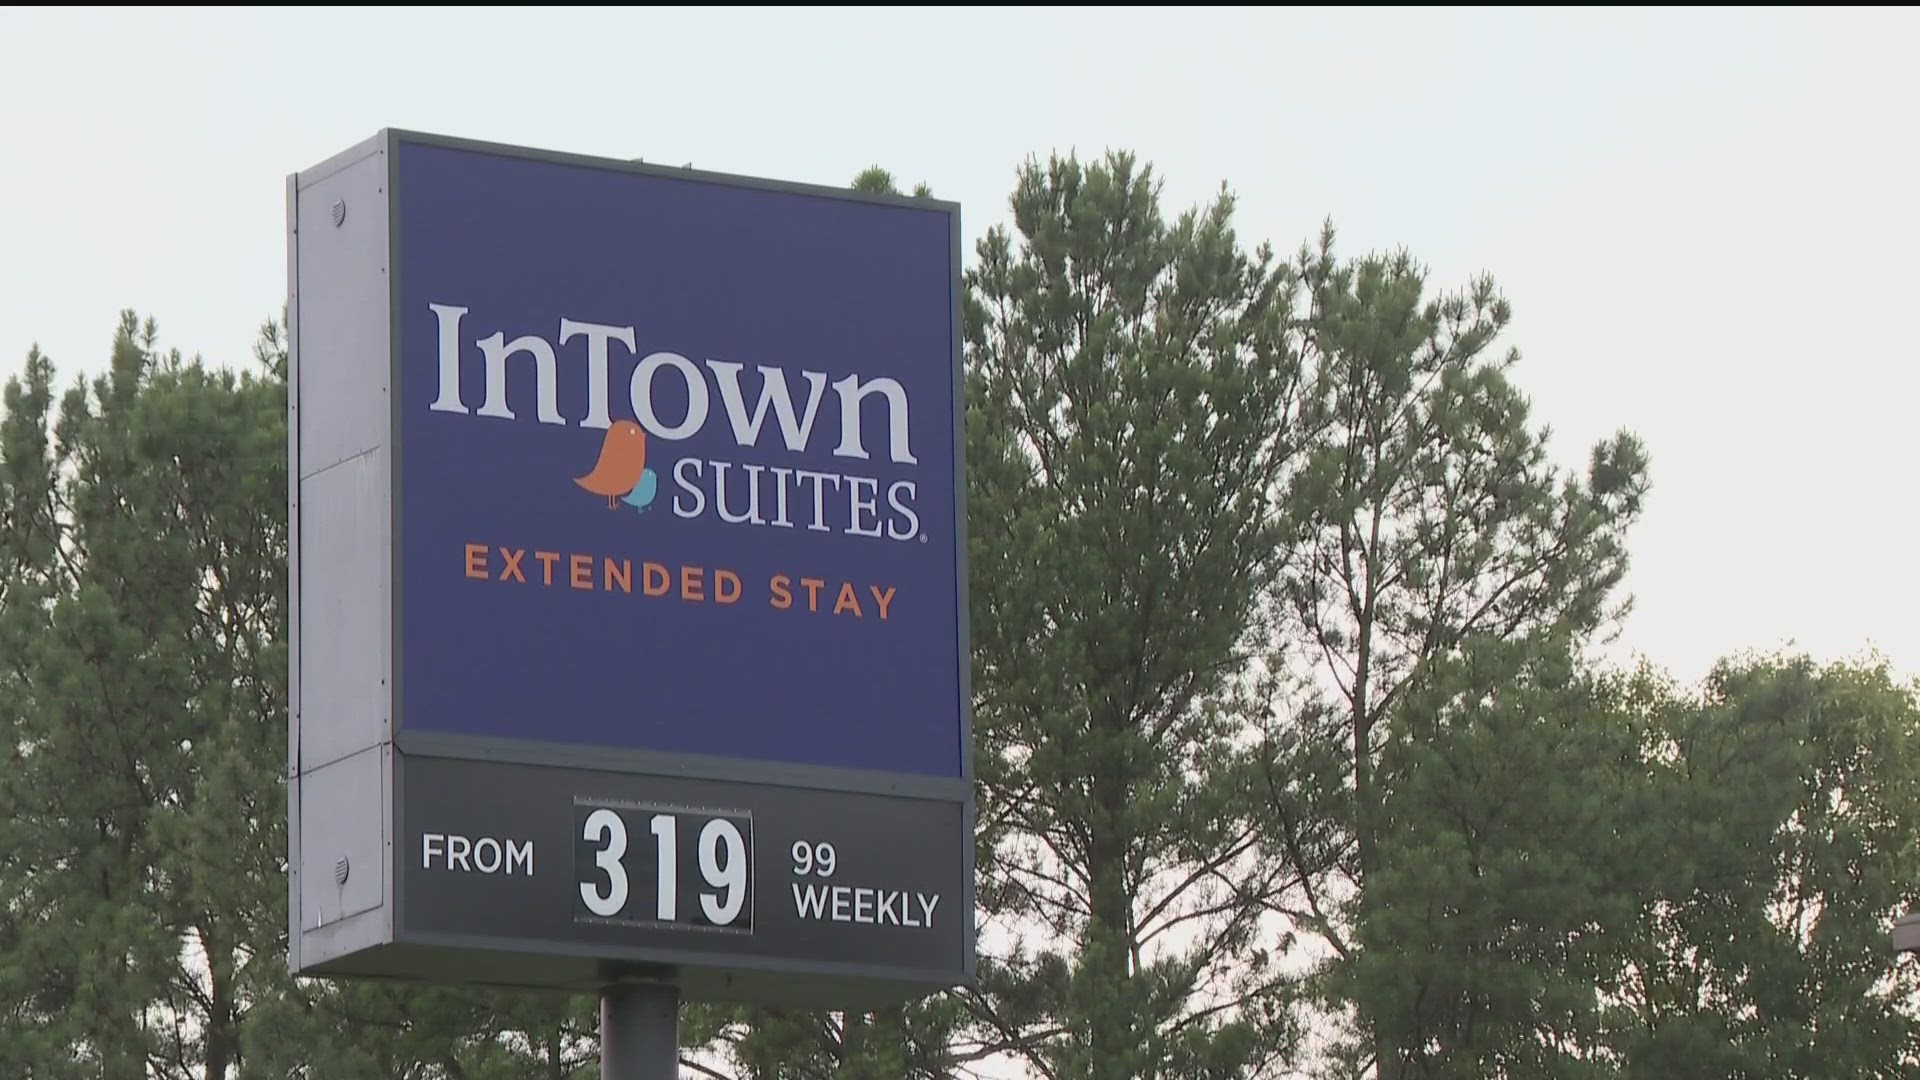 Police found the body of 33-year-old Dontavious Hardeman inside his truck on Sunday outside the Intown Suites on Northlake Drive.